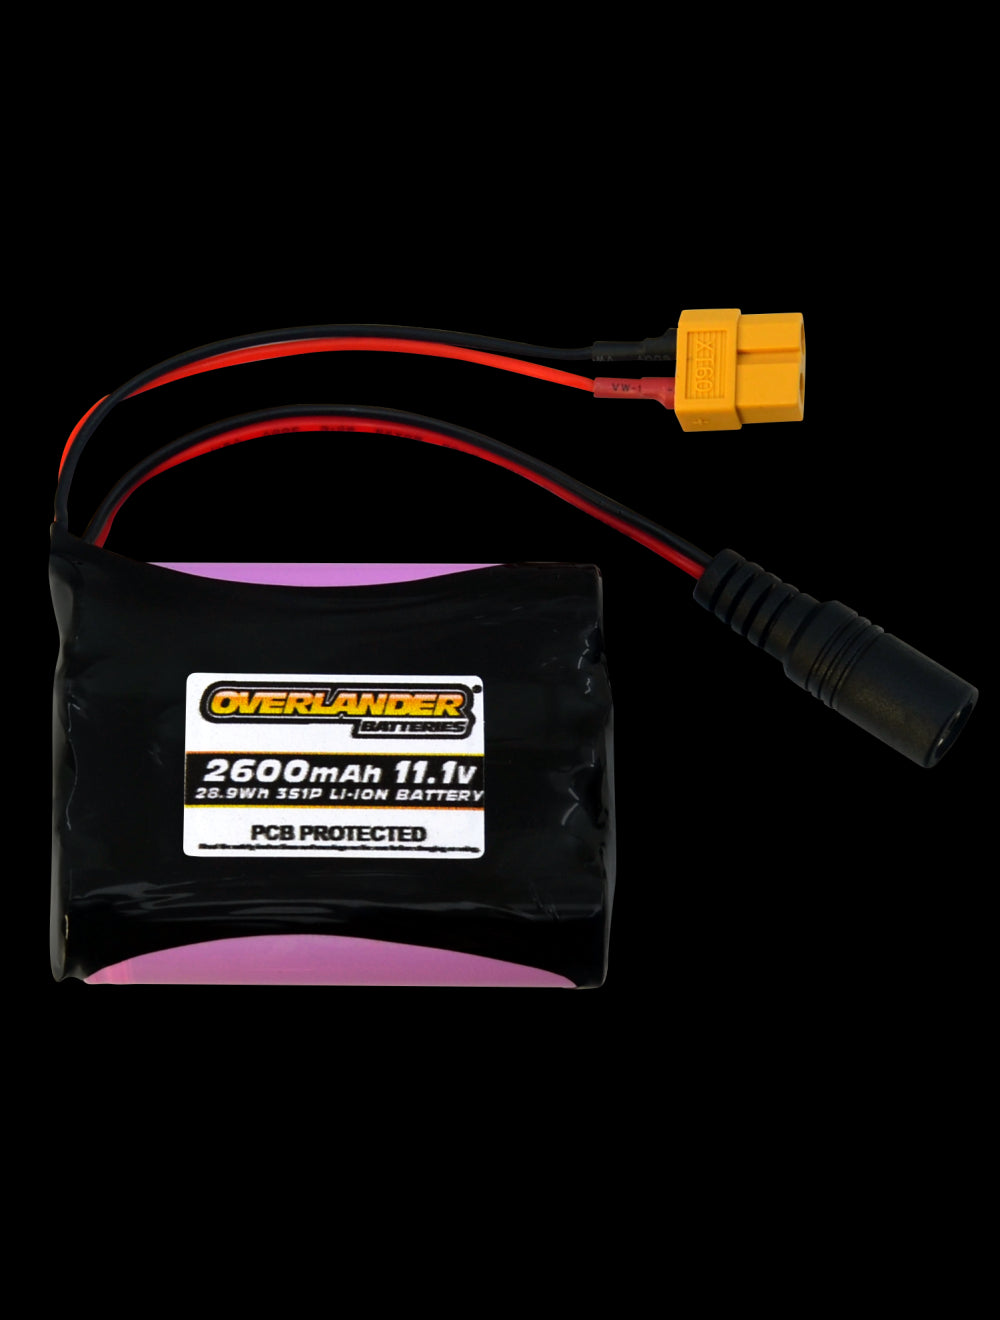 Overlander 2600mAh 3S 11.1V Li-Ion Rechargeable Battery with PCB  3300